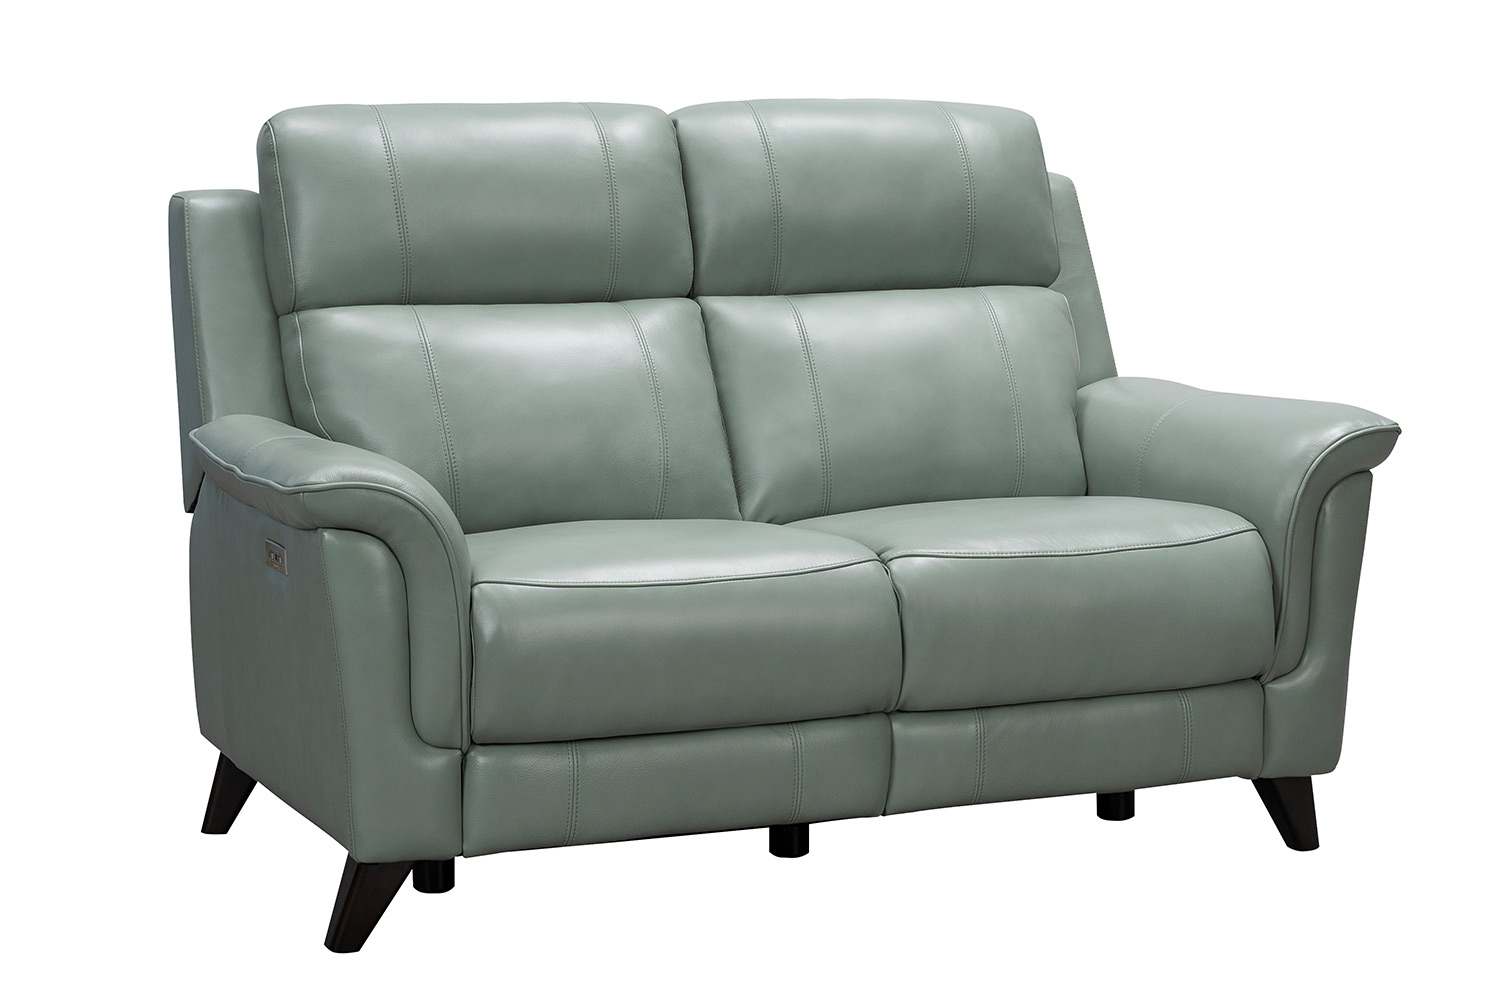 Barcalounger Kester Power Reclining Loveseat with Power Head Rests - Lorenzo Mint/Leather match